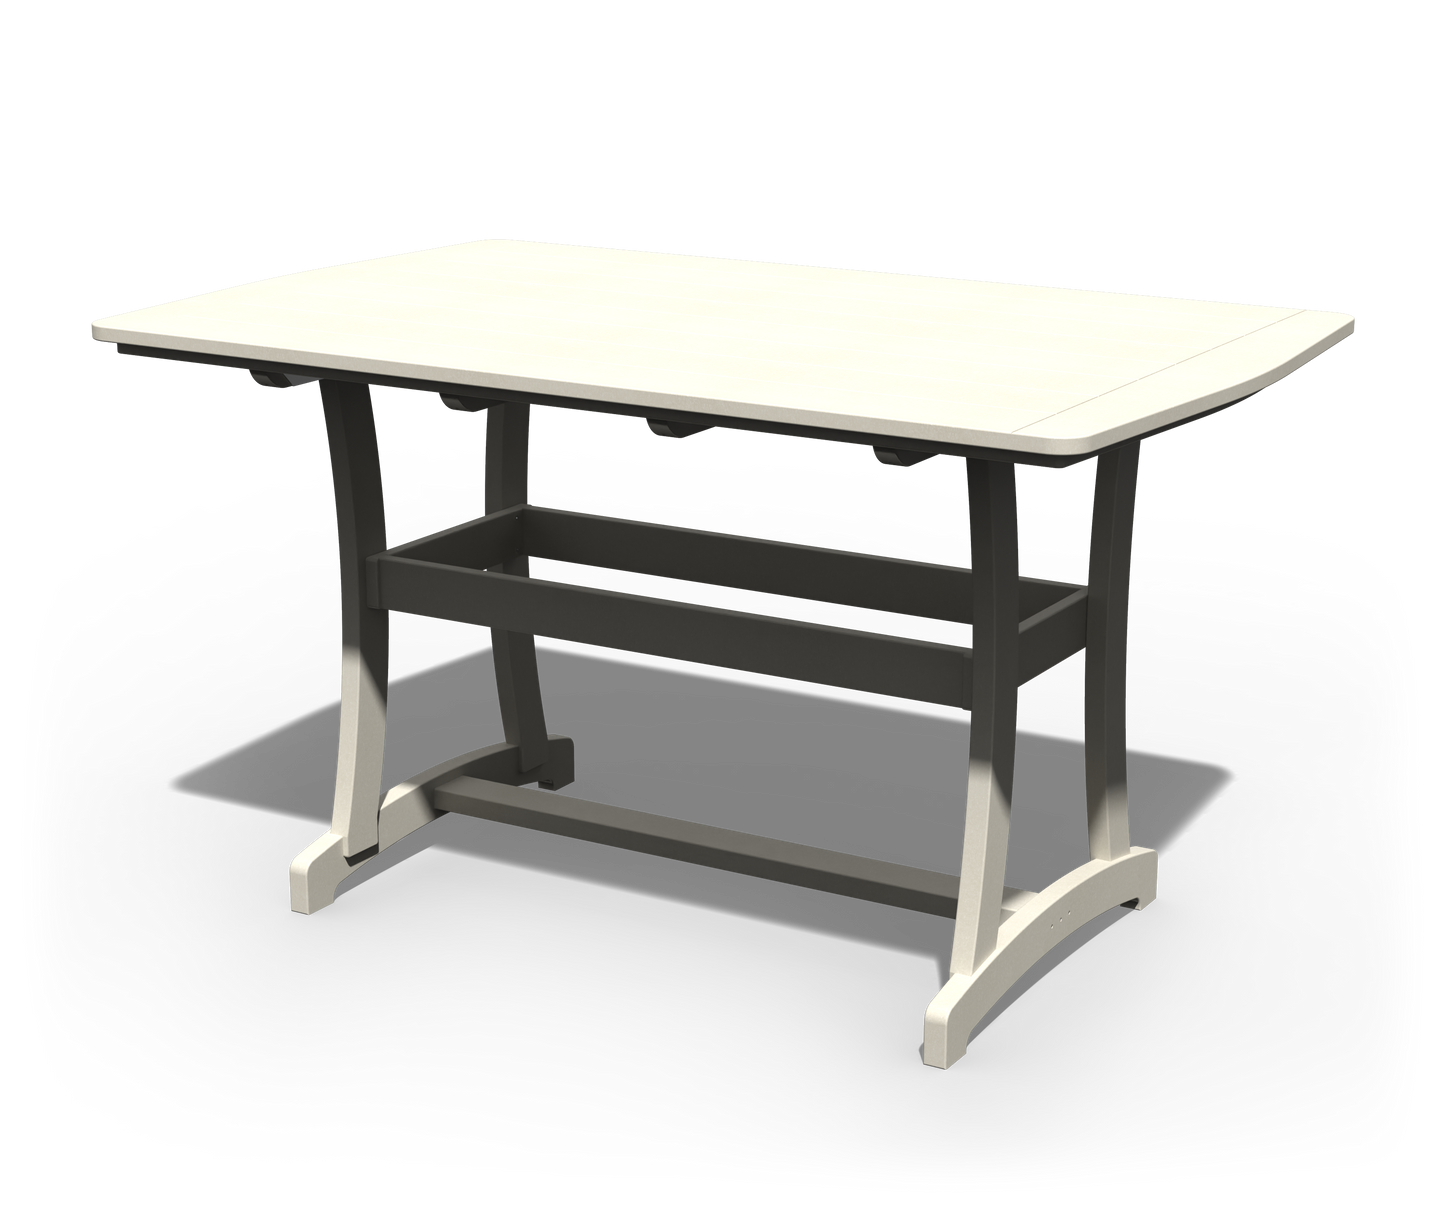 Patiova Recycled Plastic 4'x6' Legacy Bar Table - LEAD TIME TO SHIP 3 WEEKS